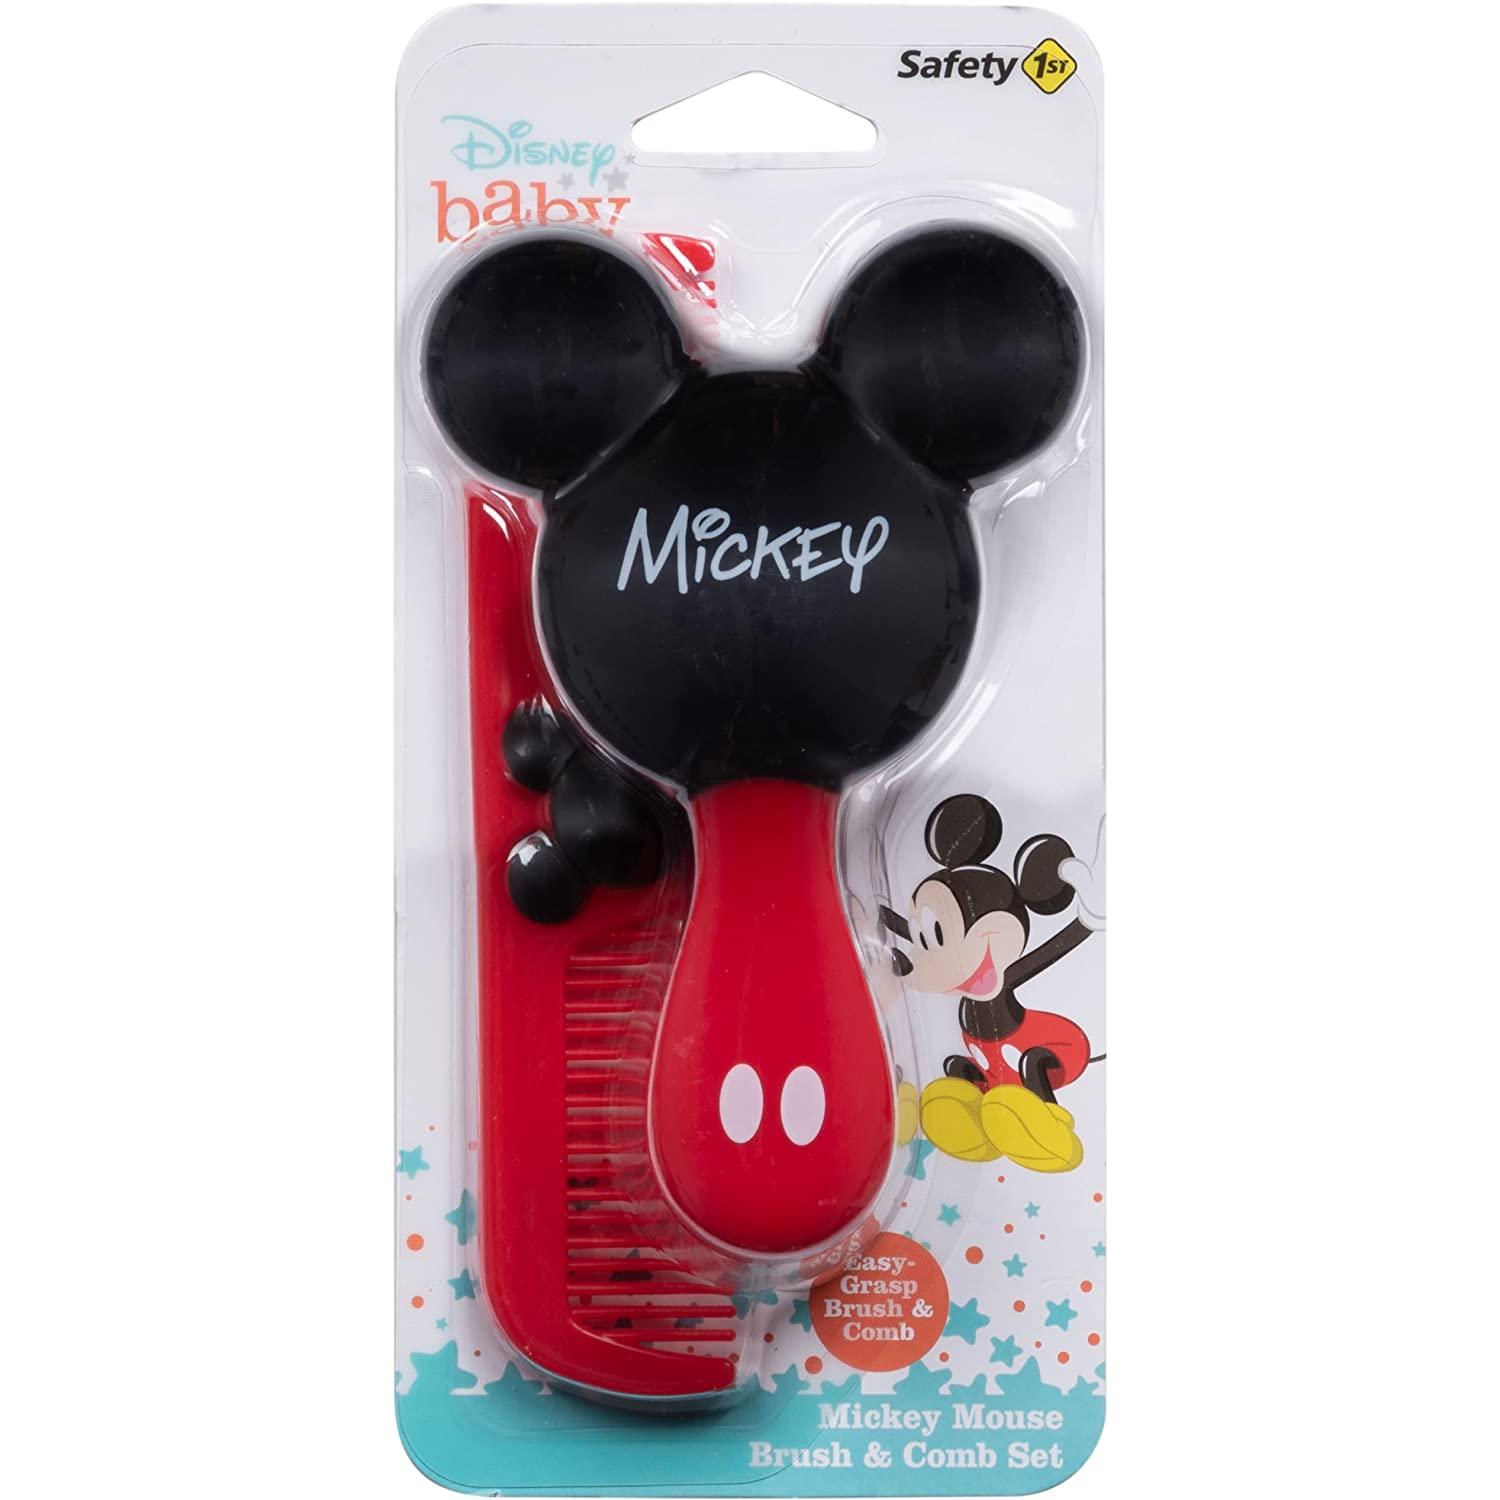 Disney Baby Mickey Mouse Brush & Comb Set, Red - With Easy Grip Handles